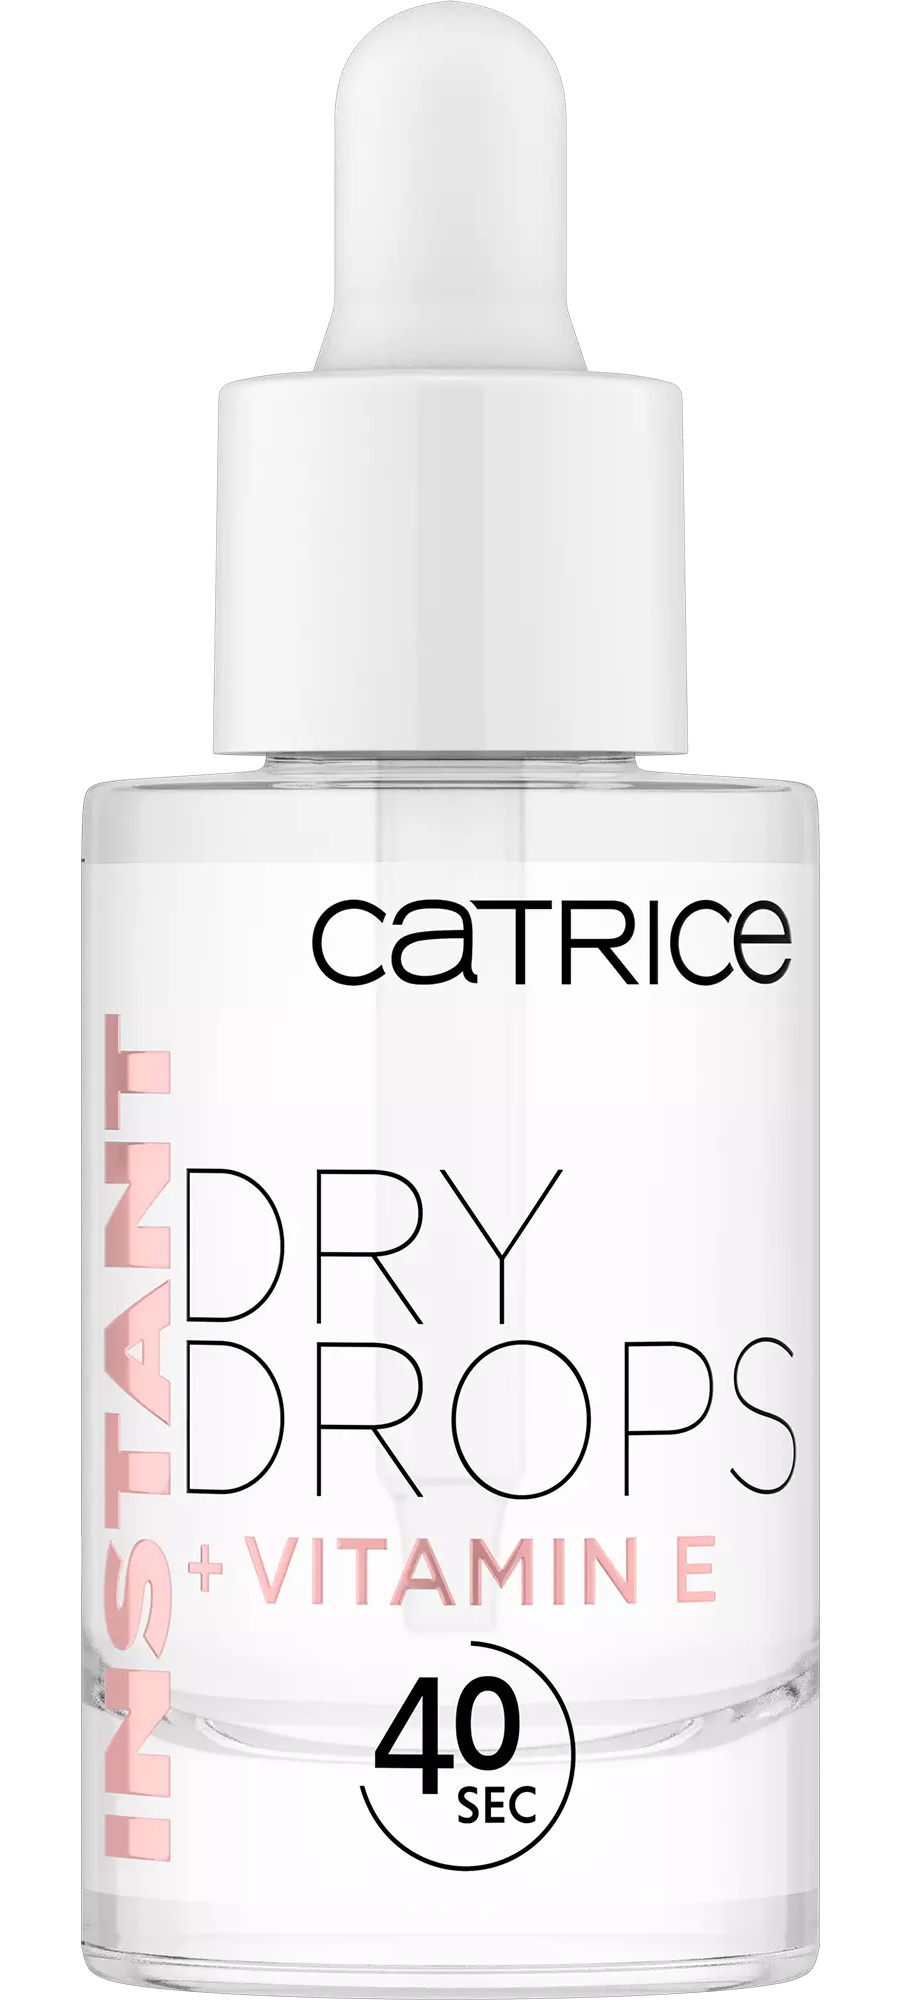 Catrice Instant Dry Drops